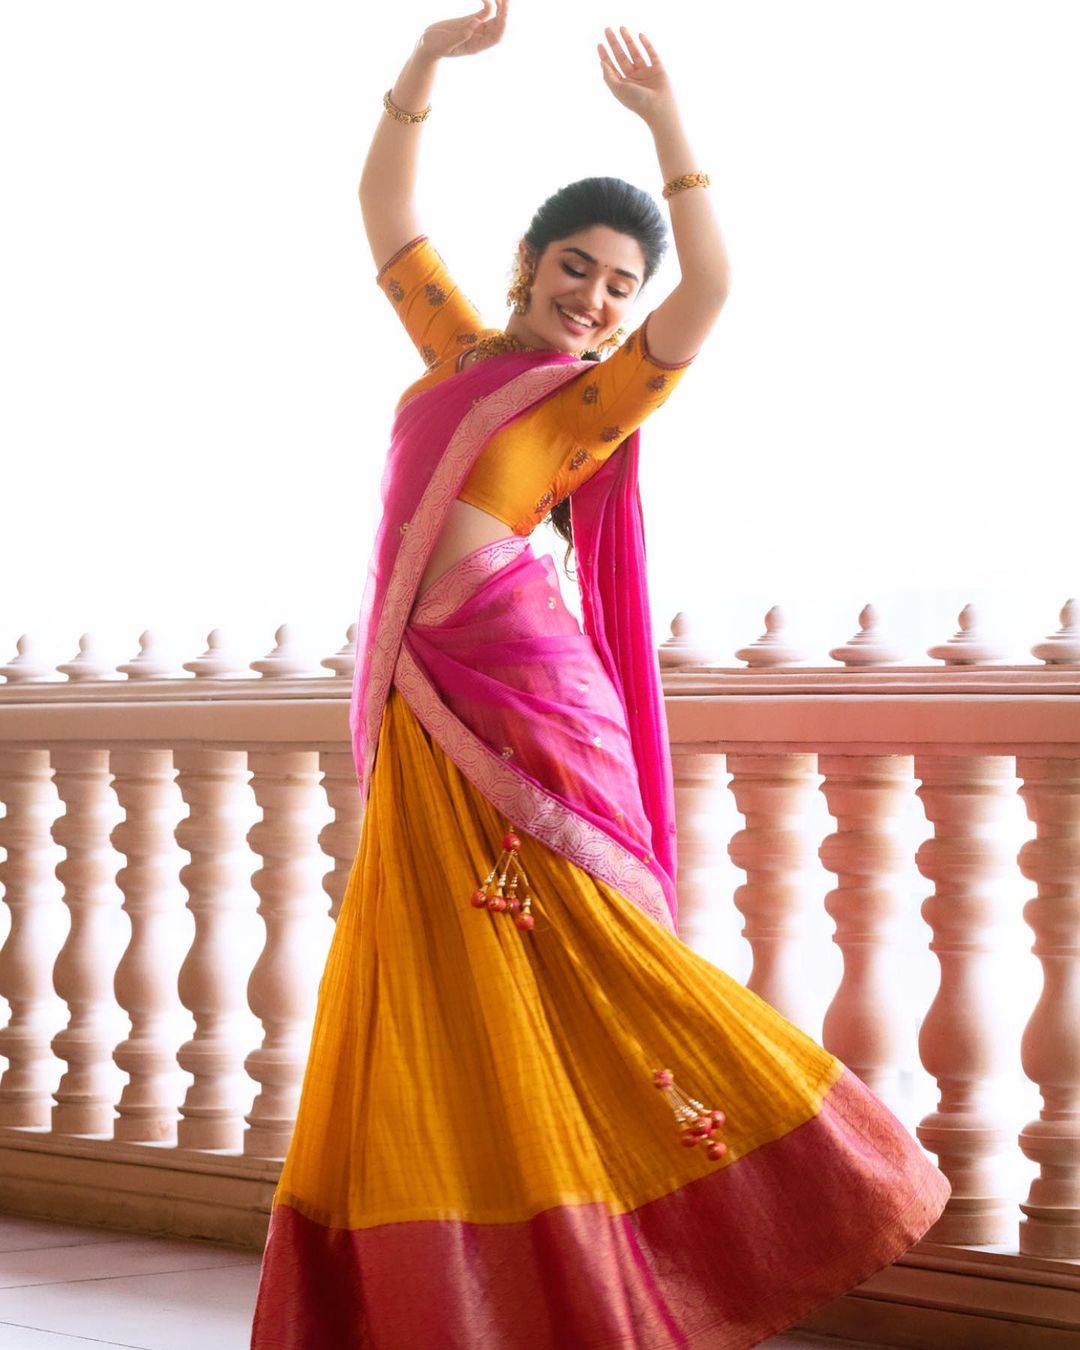 Krithi Shetty Look Gorgeous In Pink and Yellow Traditional South India Outfit